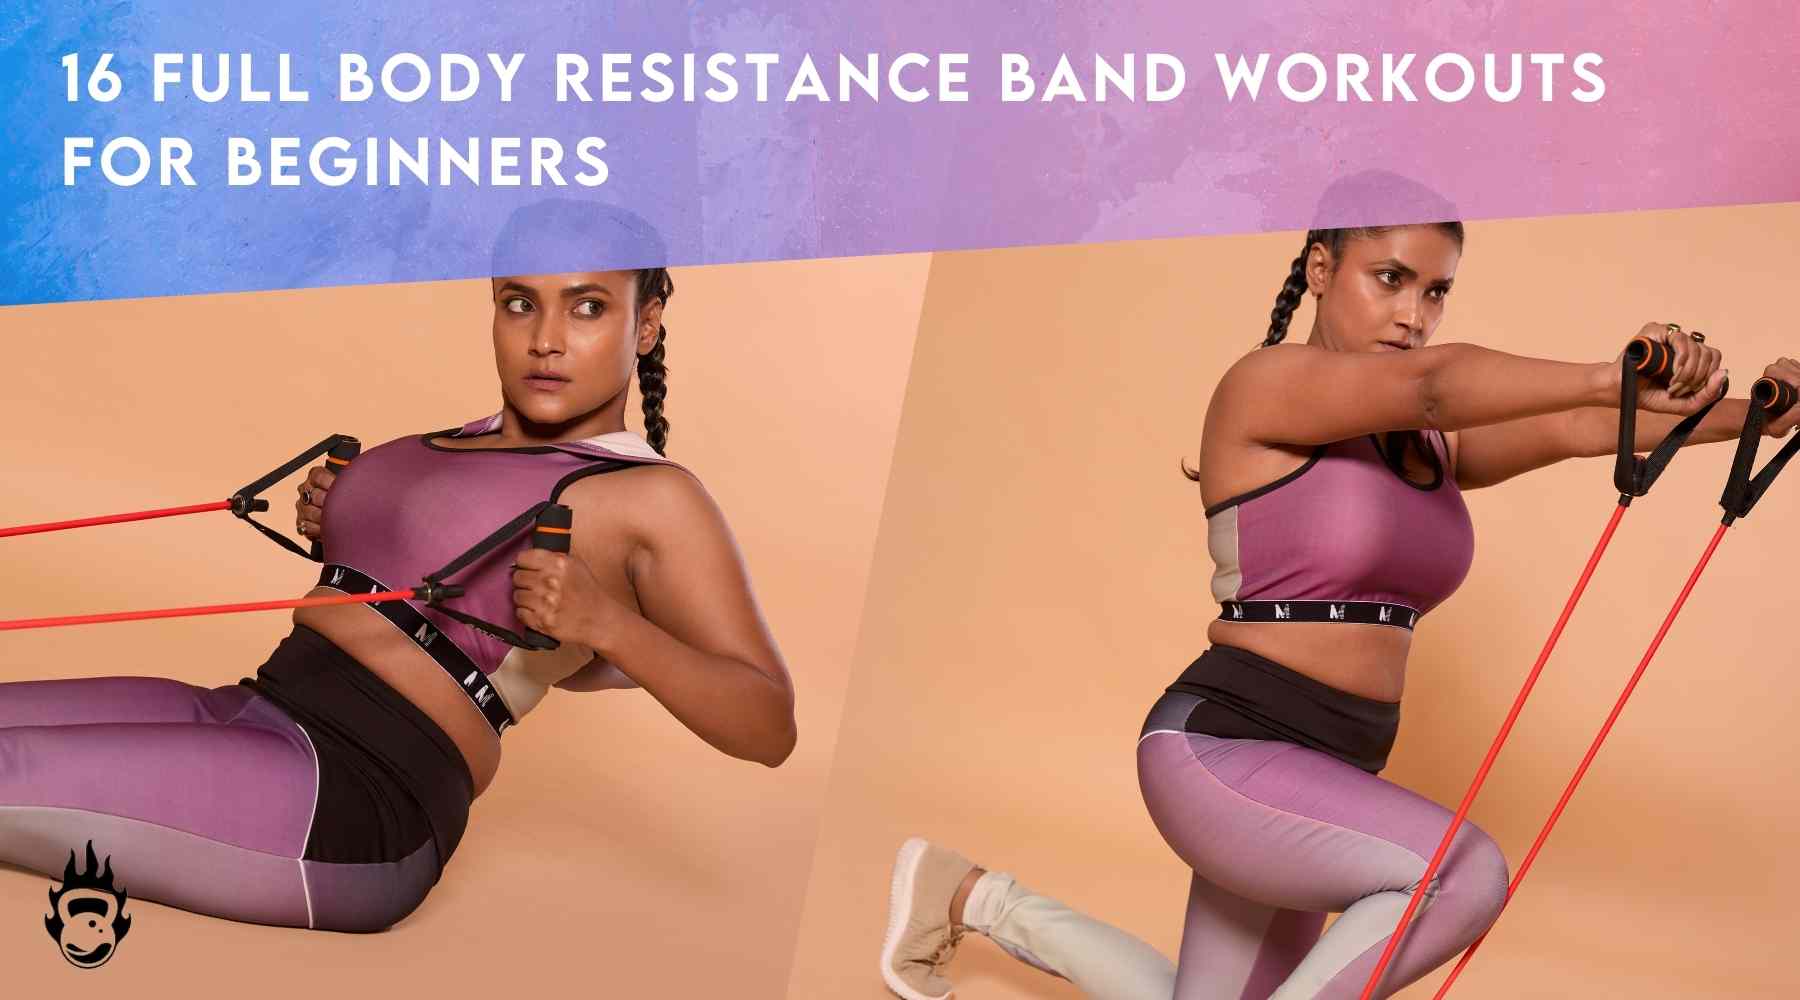 16 Full Body Resistance Band Workouts For Beginners